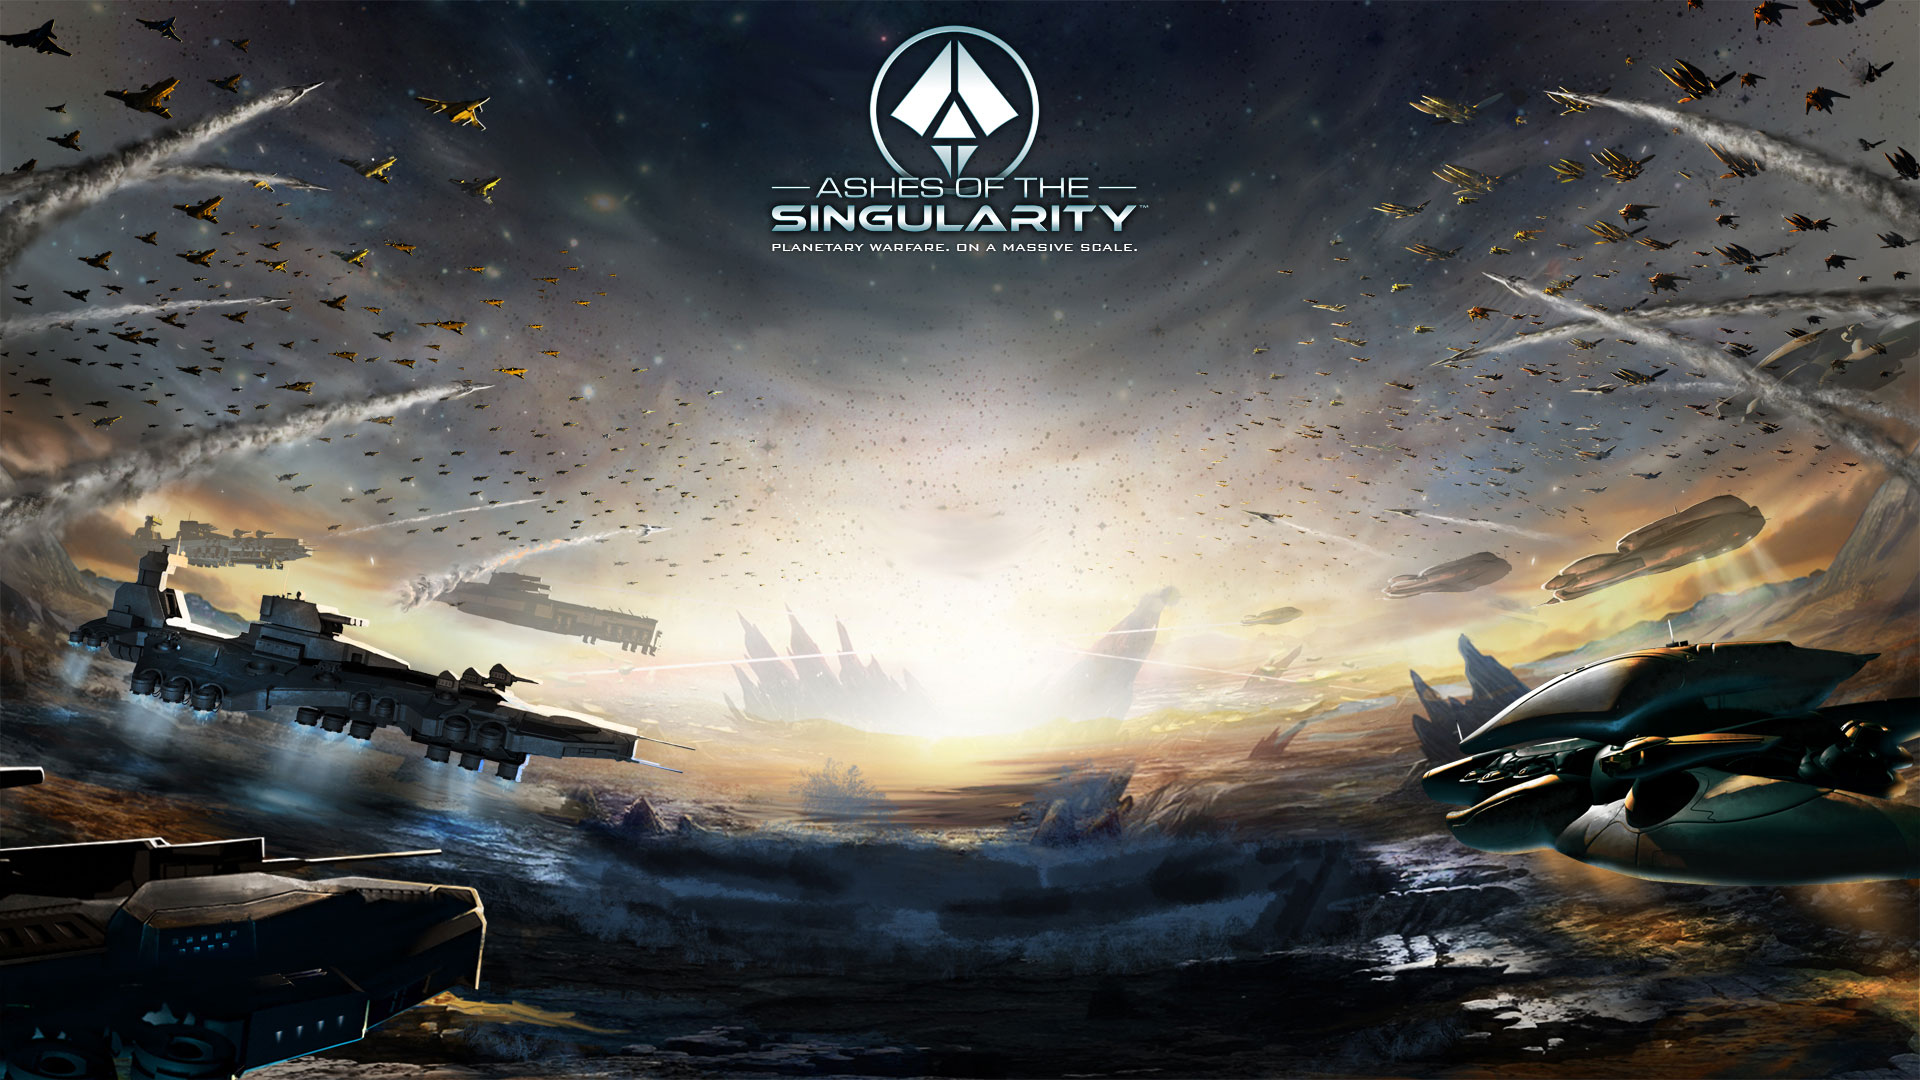 Ashes of the Singularity 4K Wallpaper | Ashes of the Singularity 1080p ...